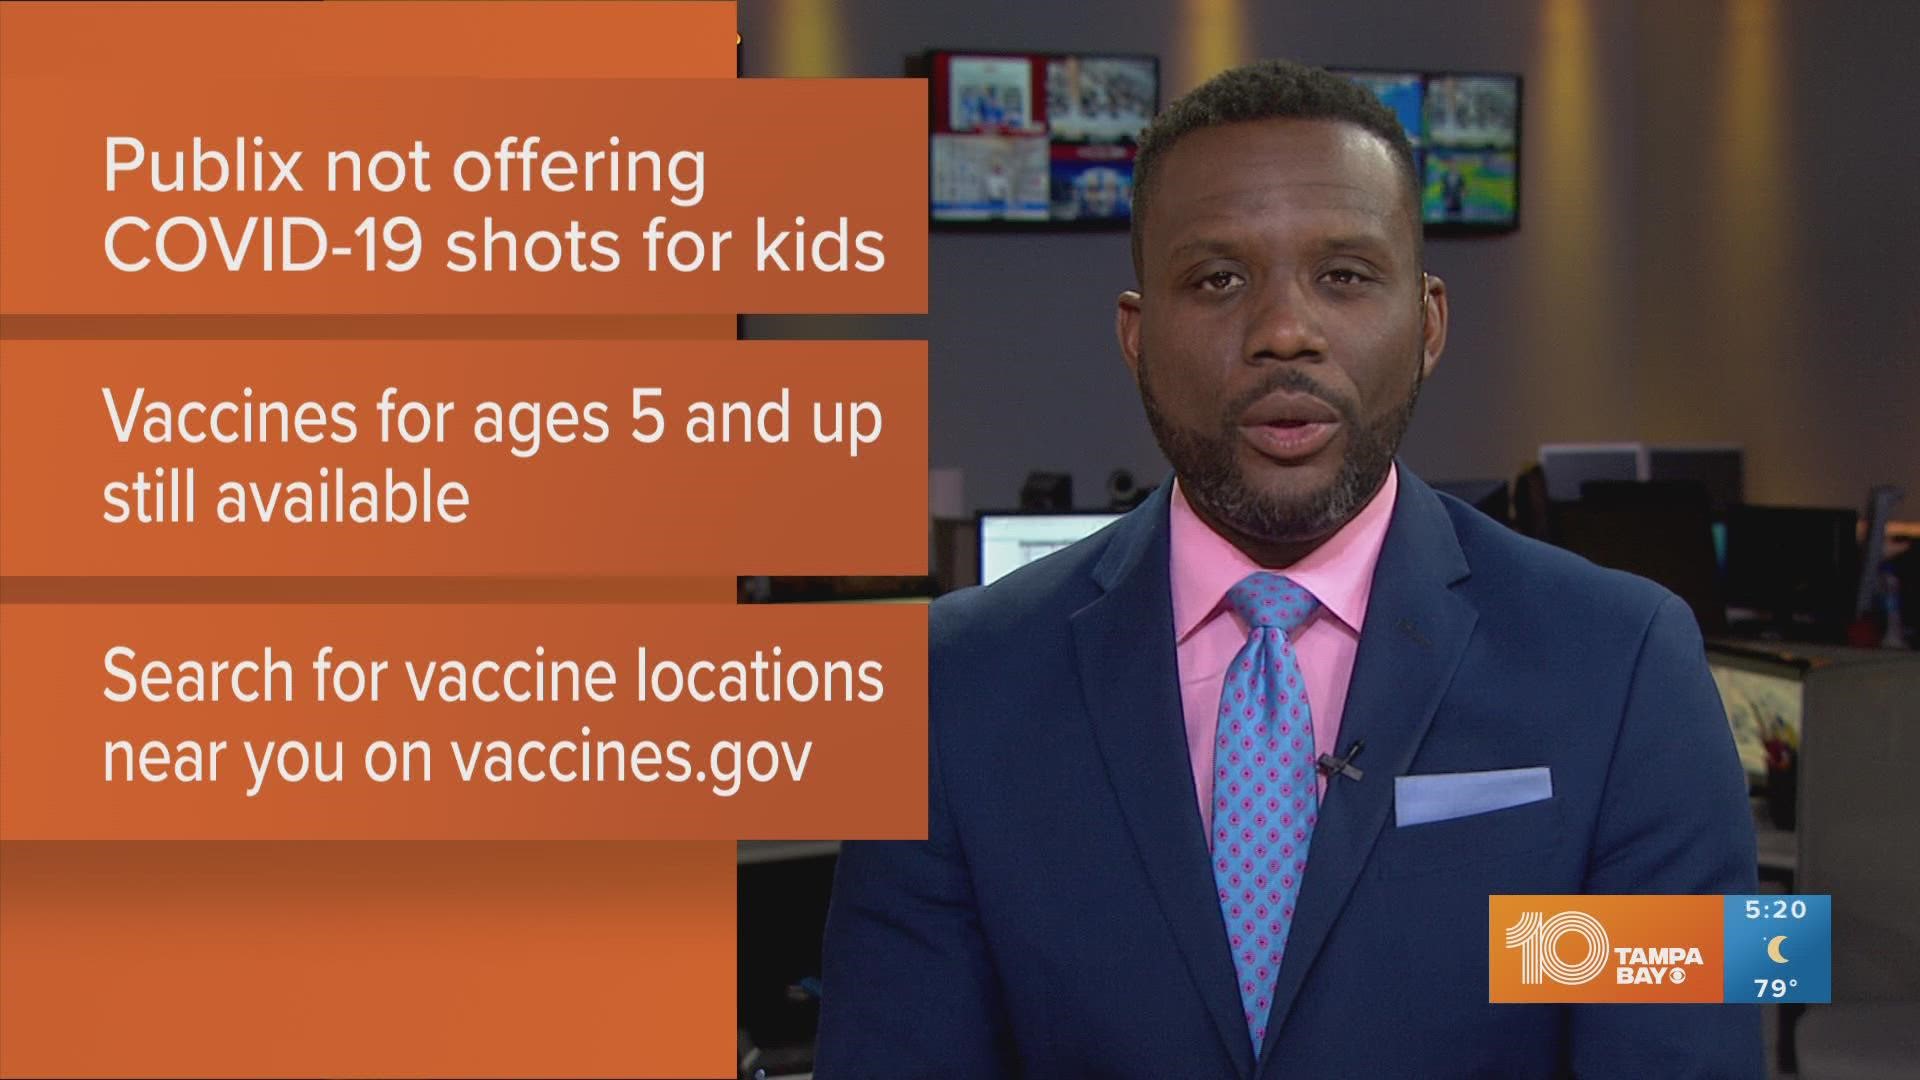 The Florida Department of Health is not recommending shots for healthy children, contradicting federal health experts' guidance.